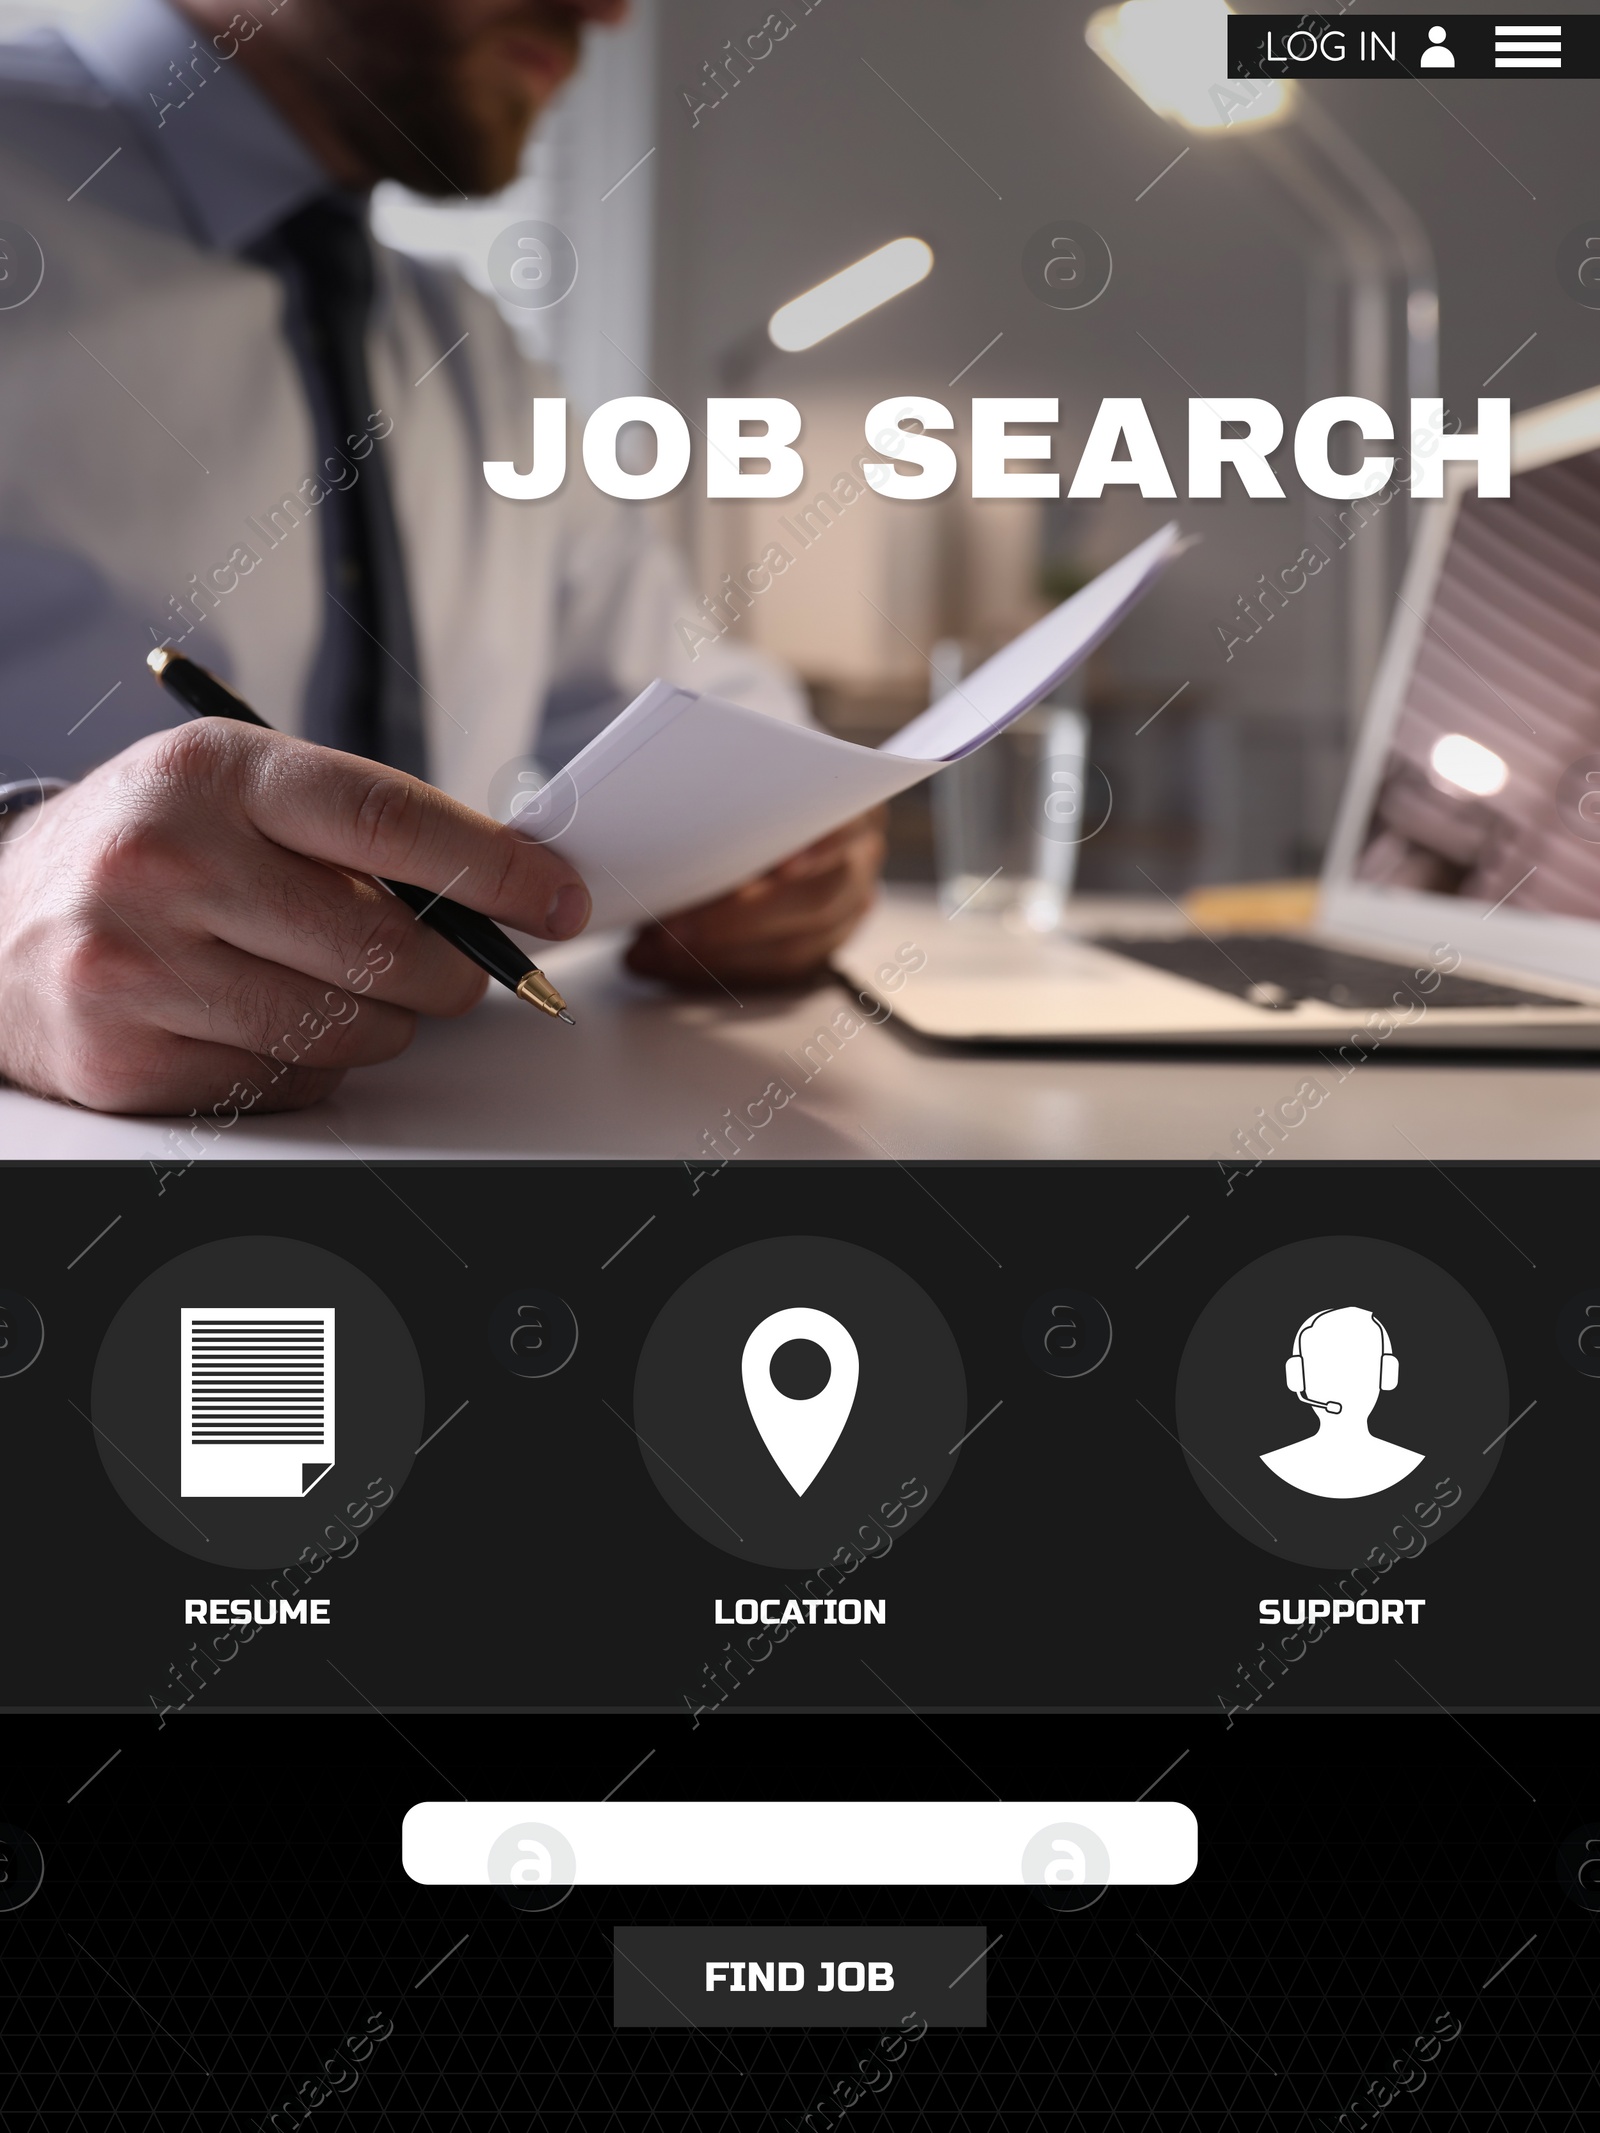 Image of Homepage of employment application. Job search engine